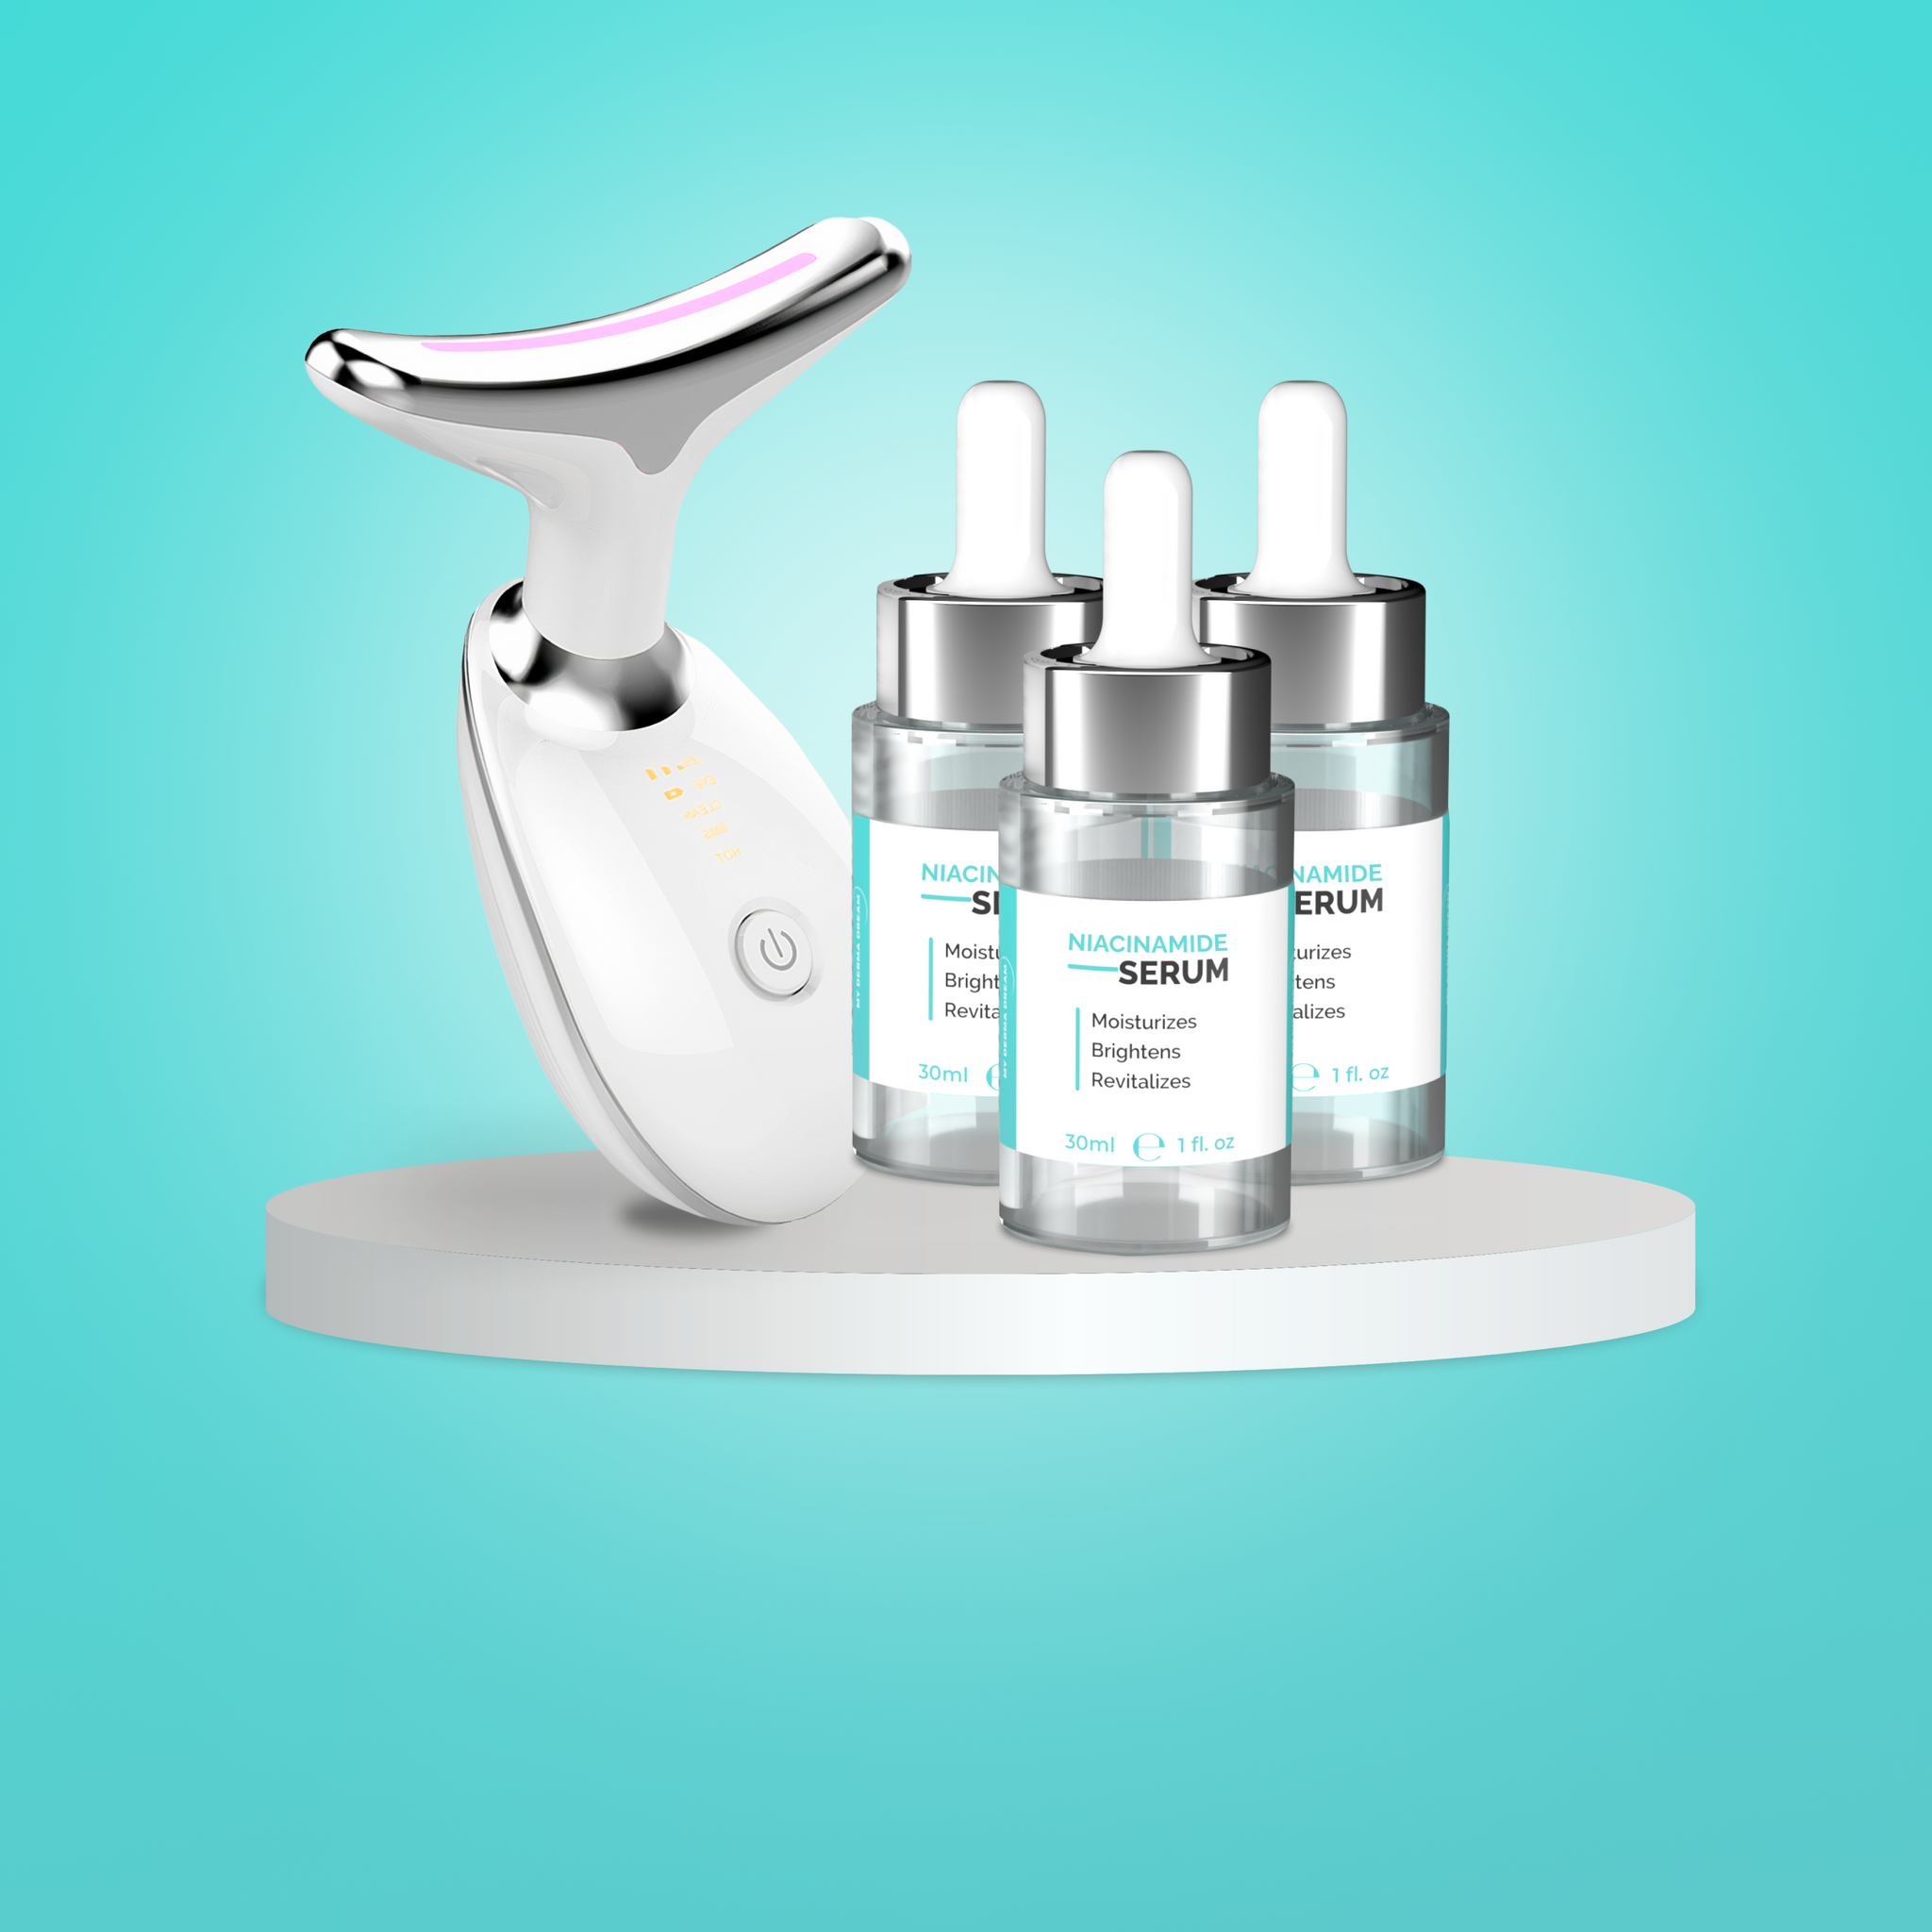 MyoGlow - Advanced Neck Firming & Lifting Device for Ageless Beauty